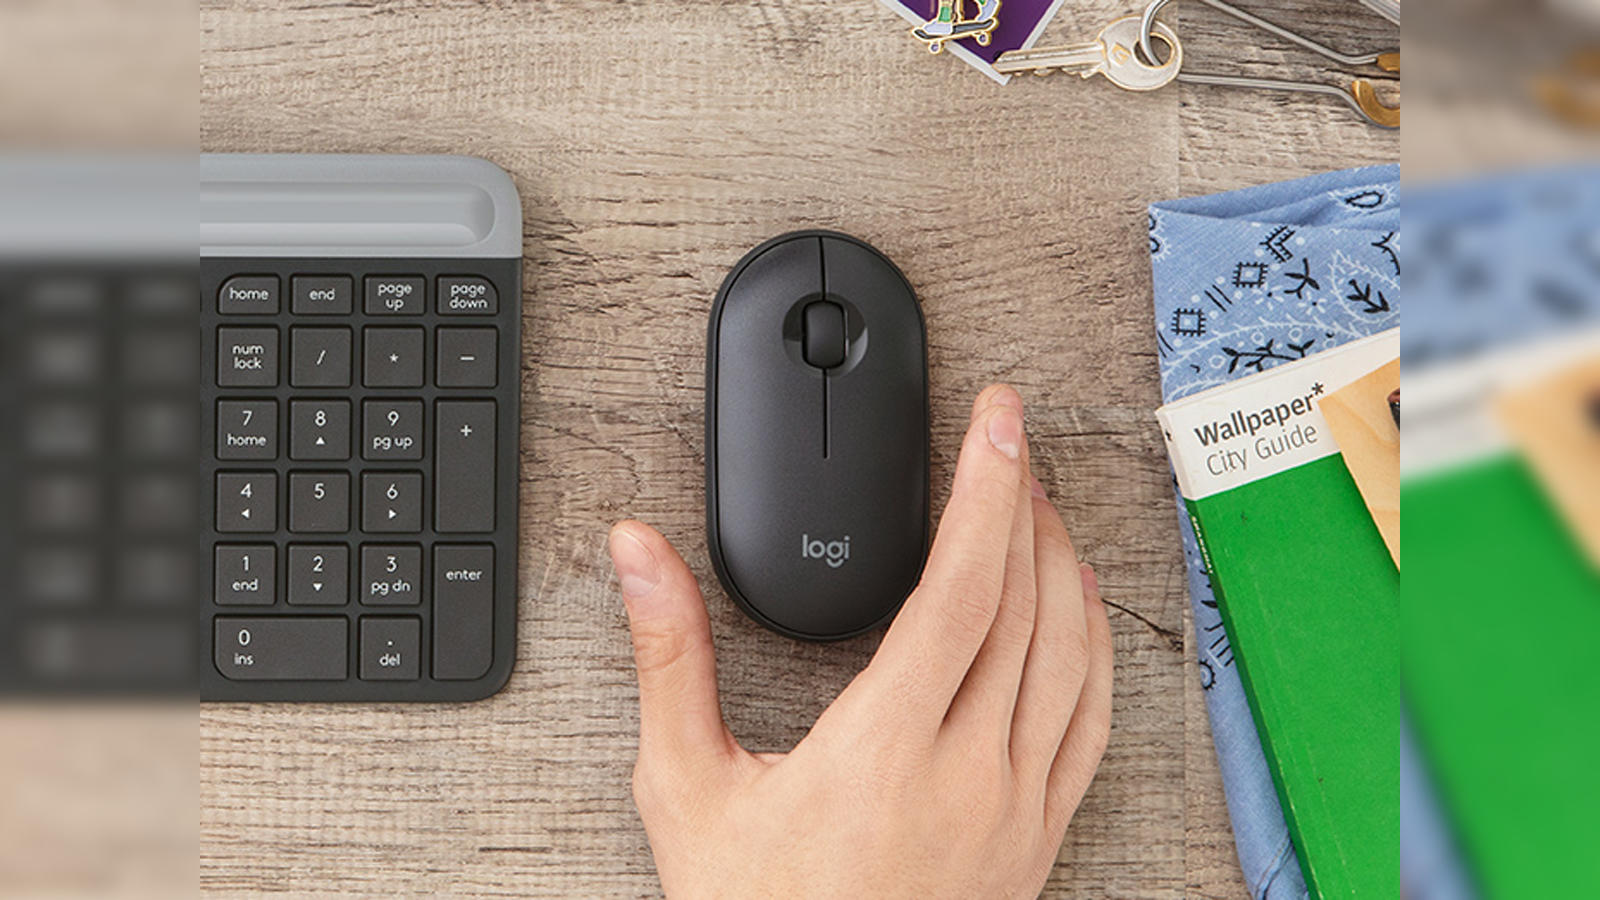 How to Connect a Logitech Wireless Mouse to Any Computer